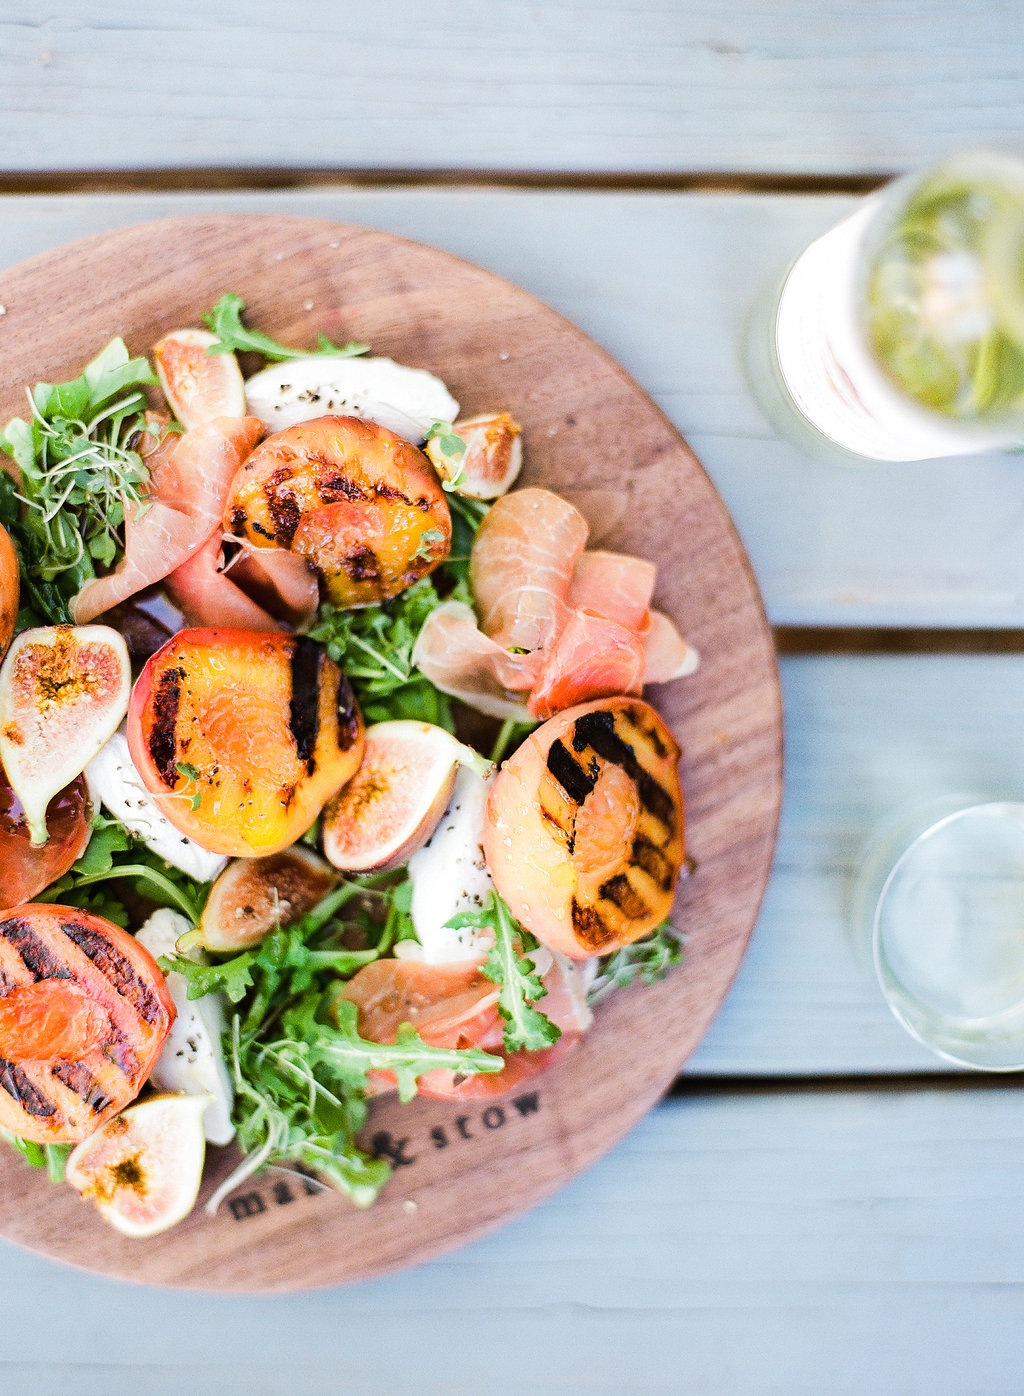 This Grilled Peach & Prosciutto Salad has that summertime citrus we all crave, it's hearty enough to satisfy even the most staunch salad nay sayers, and it's just about the perfect dish for any occasion - specifically a backyard bash!